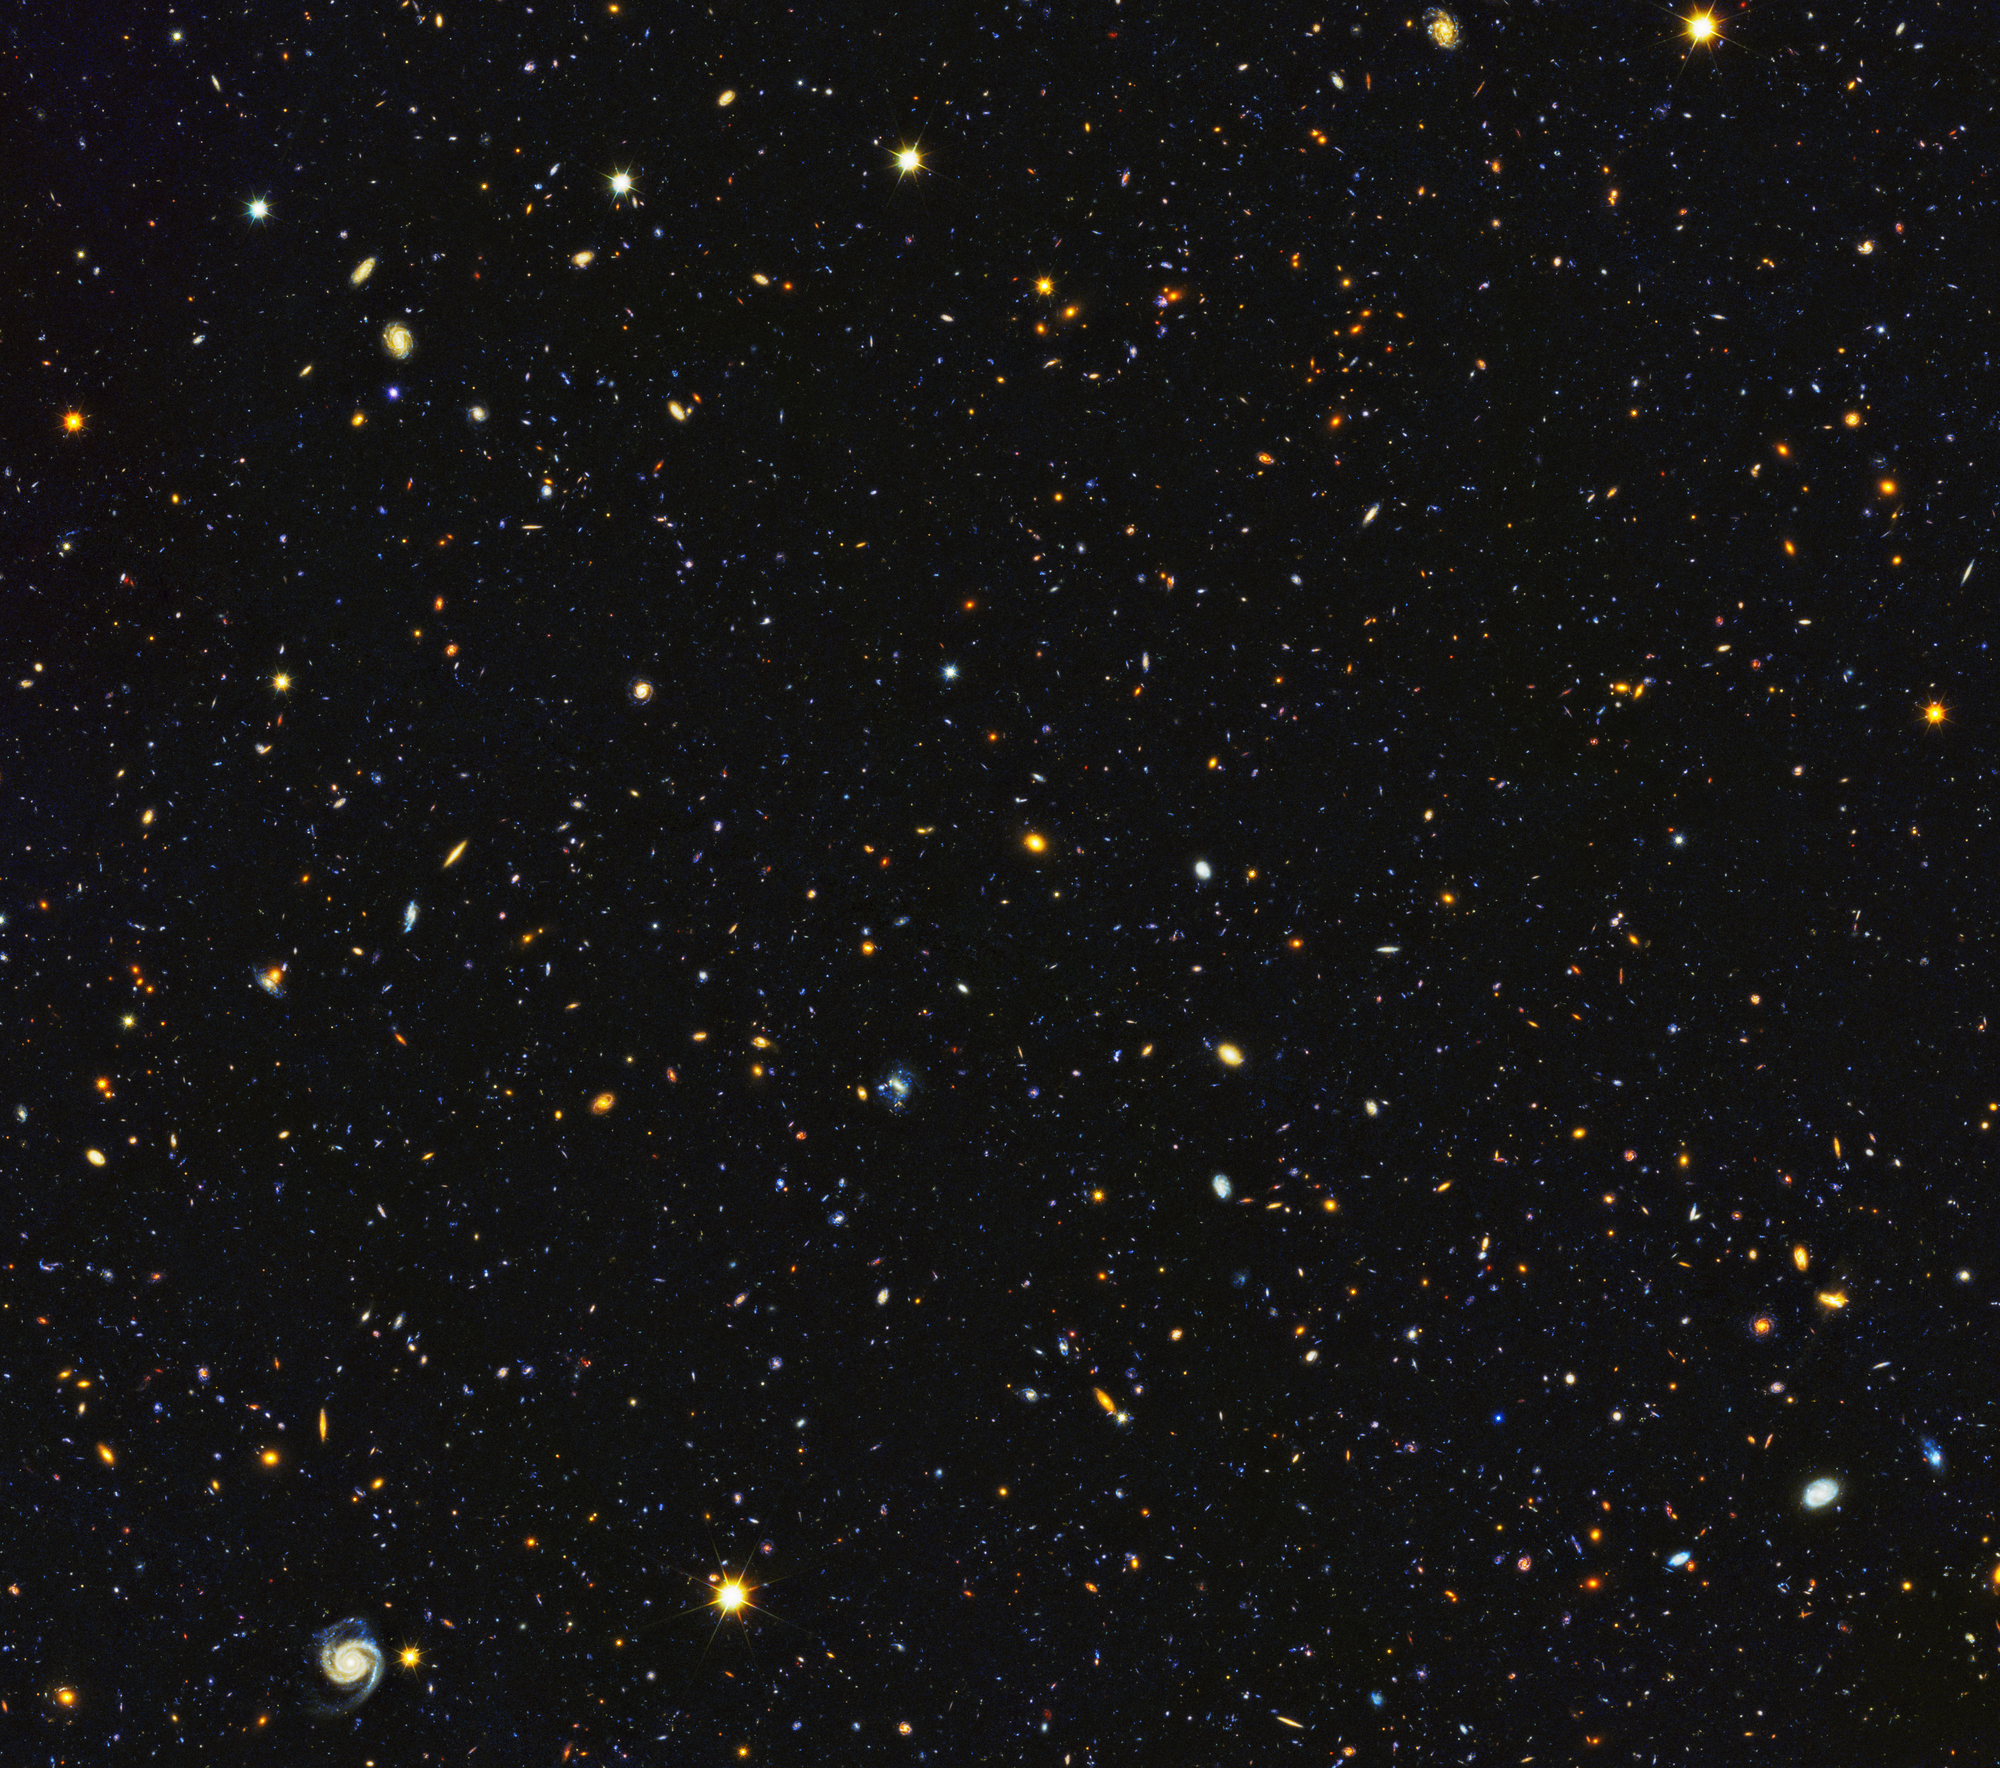 A dark sky packed full of galaxies of all shapes and sizes